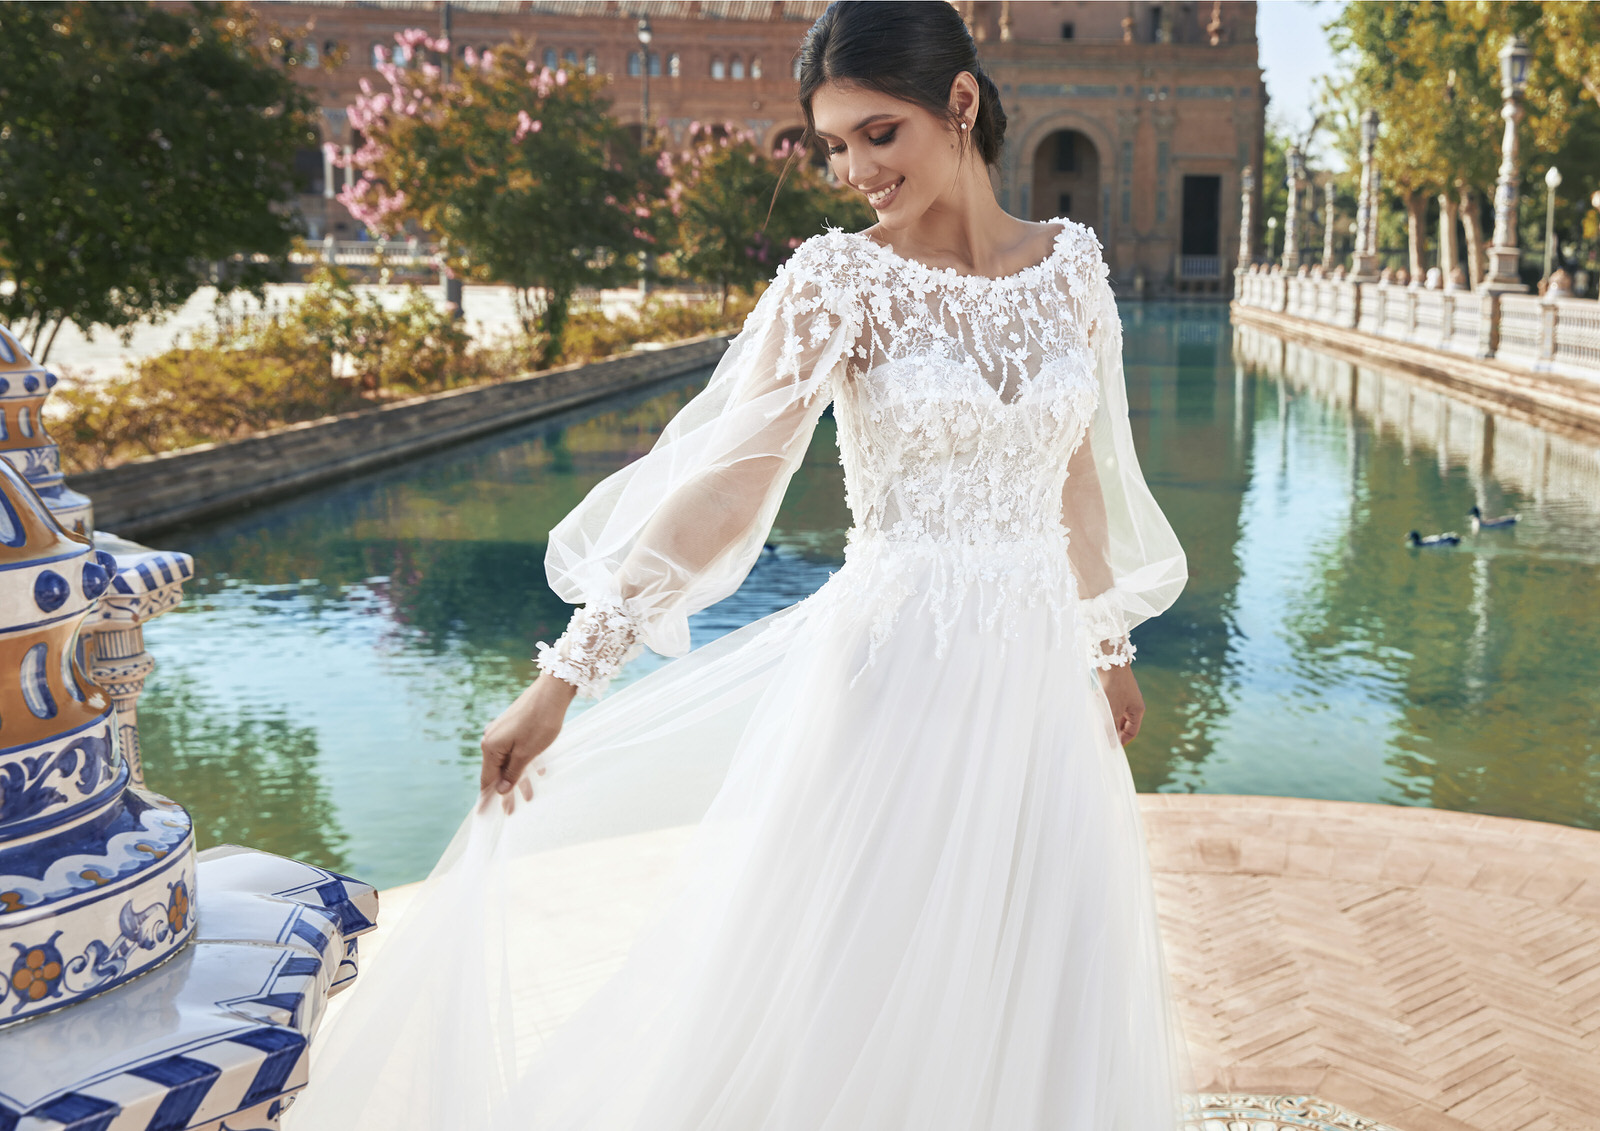 Top 3 Pronovias Wedding Gowns for a Modern Bride - Fashionably